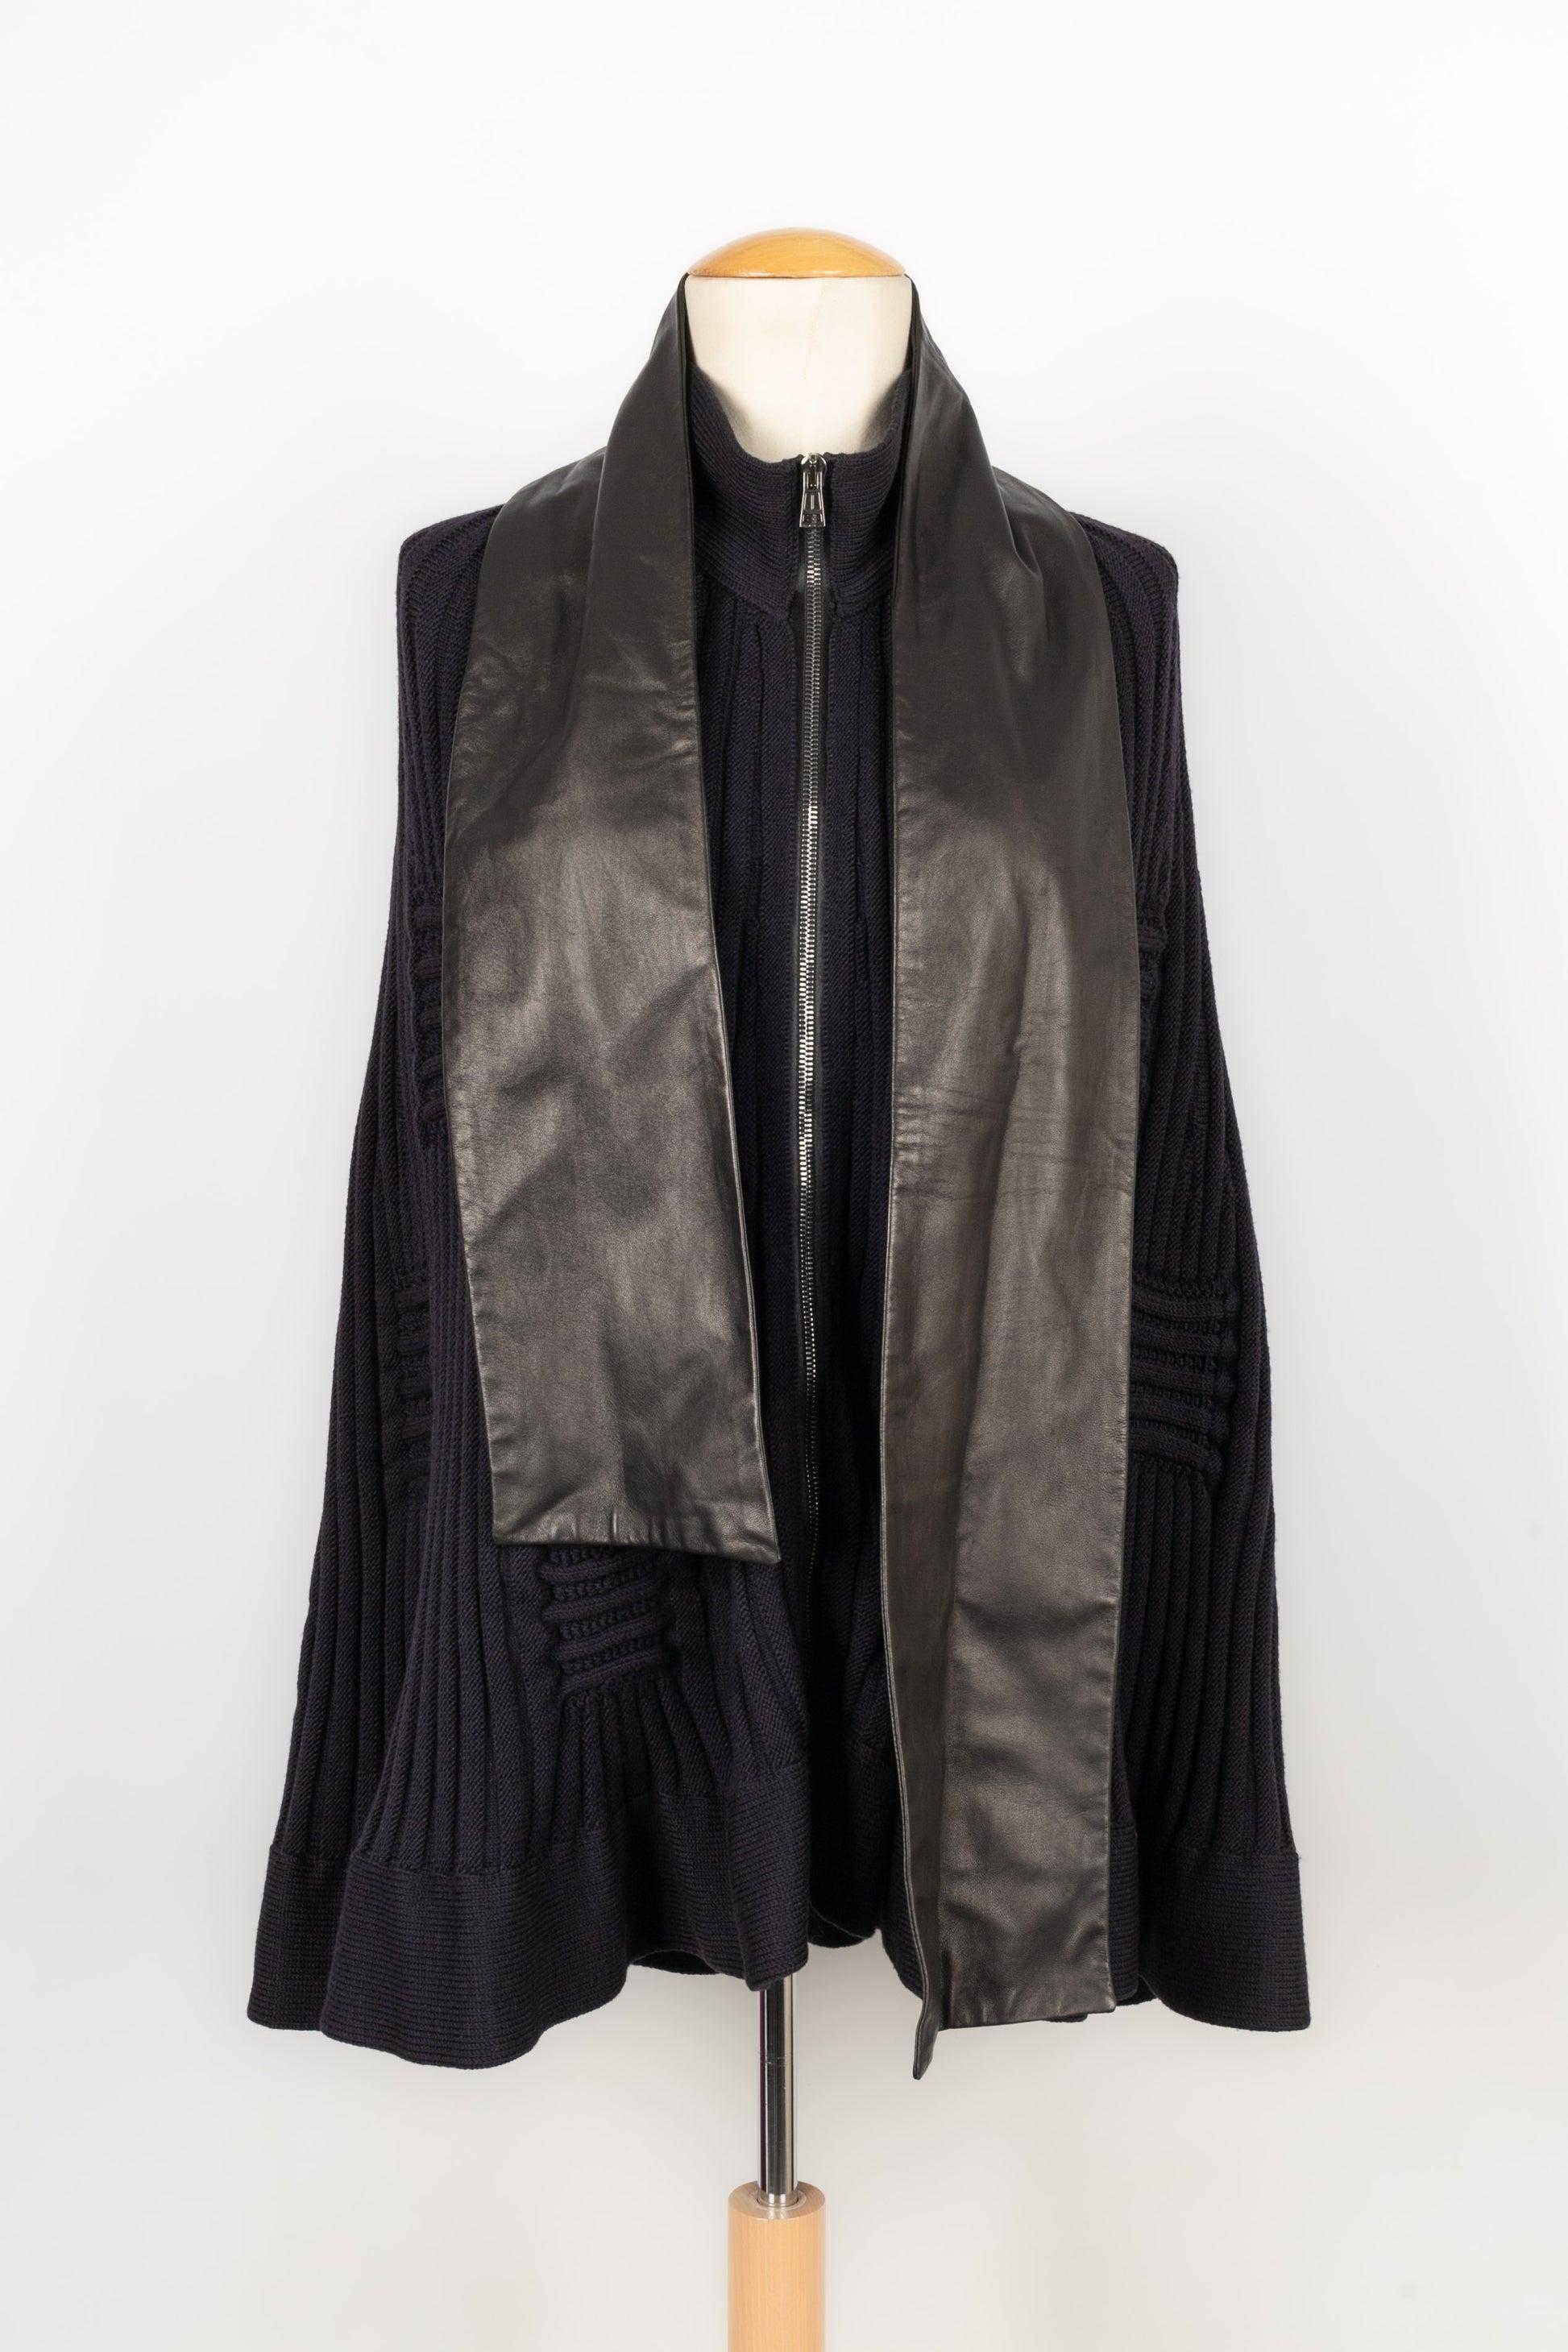 Valentino - (Made in Italy) Dark blue new wool cape with a black leather ascot tie. Indicated size L, it fits a 40FR.

Additional information:
Condition: Very good condition
Dimensions: Length: 75 cm

Seller Reference: M102